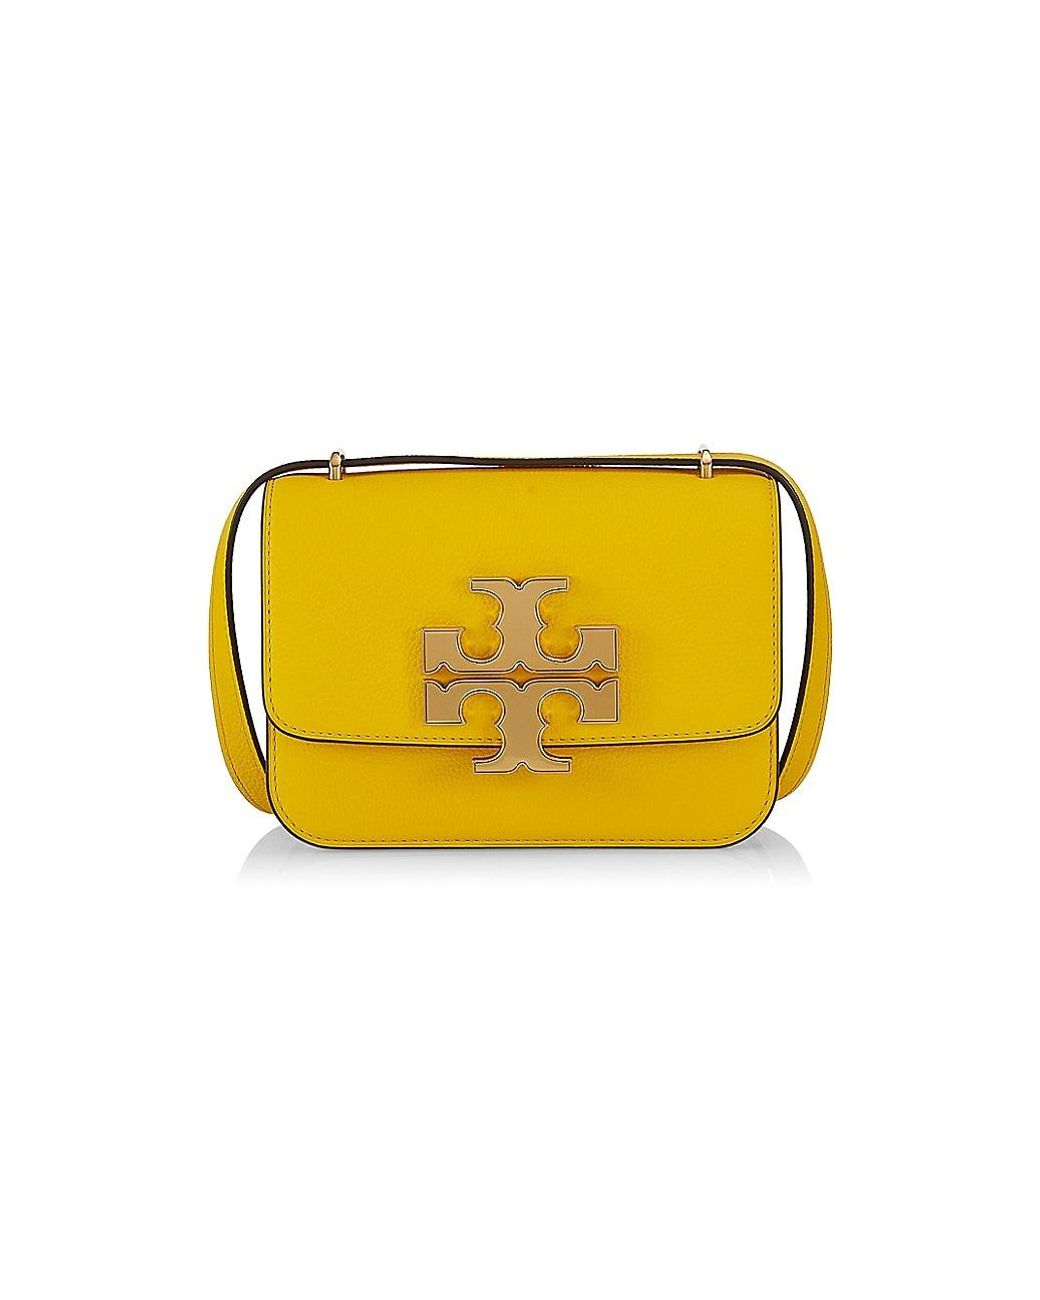 Tory Burch Small Eleanor Leather Shoulder Bag in Yellow | Lyst